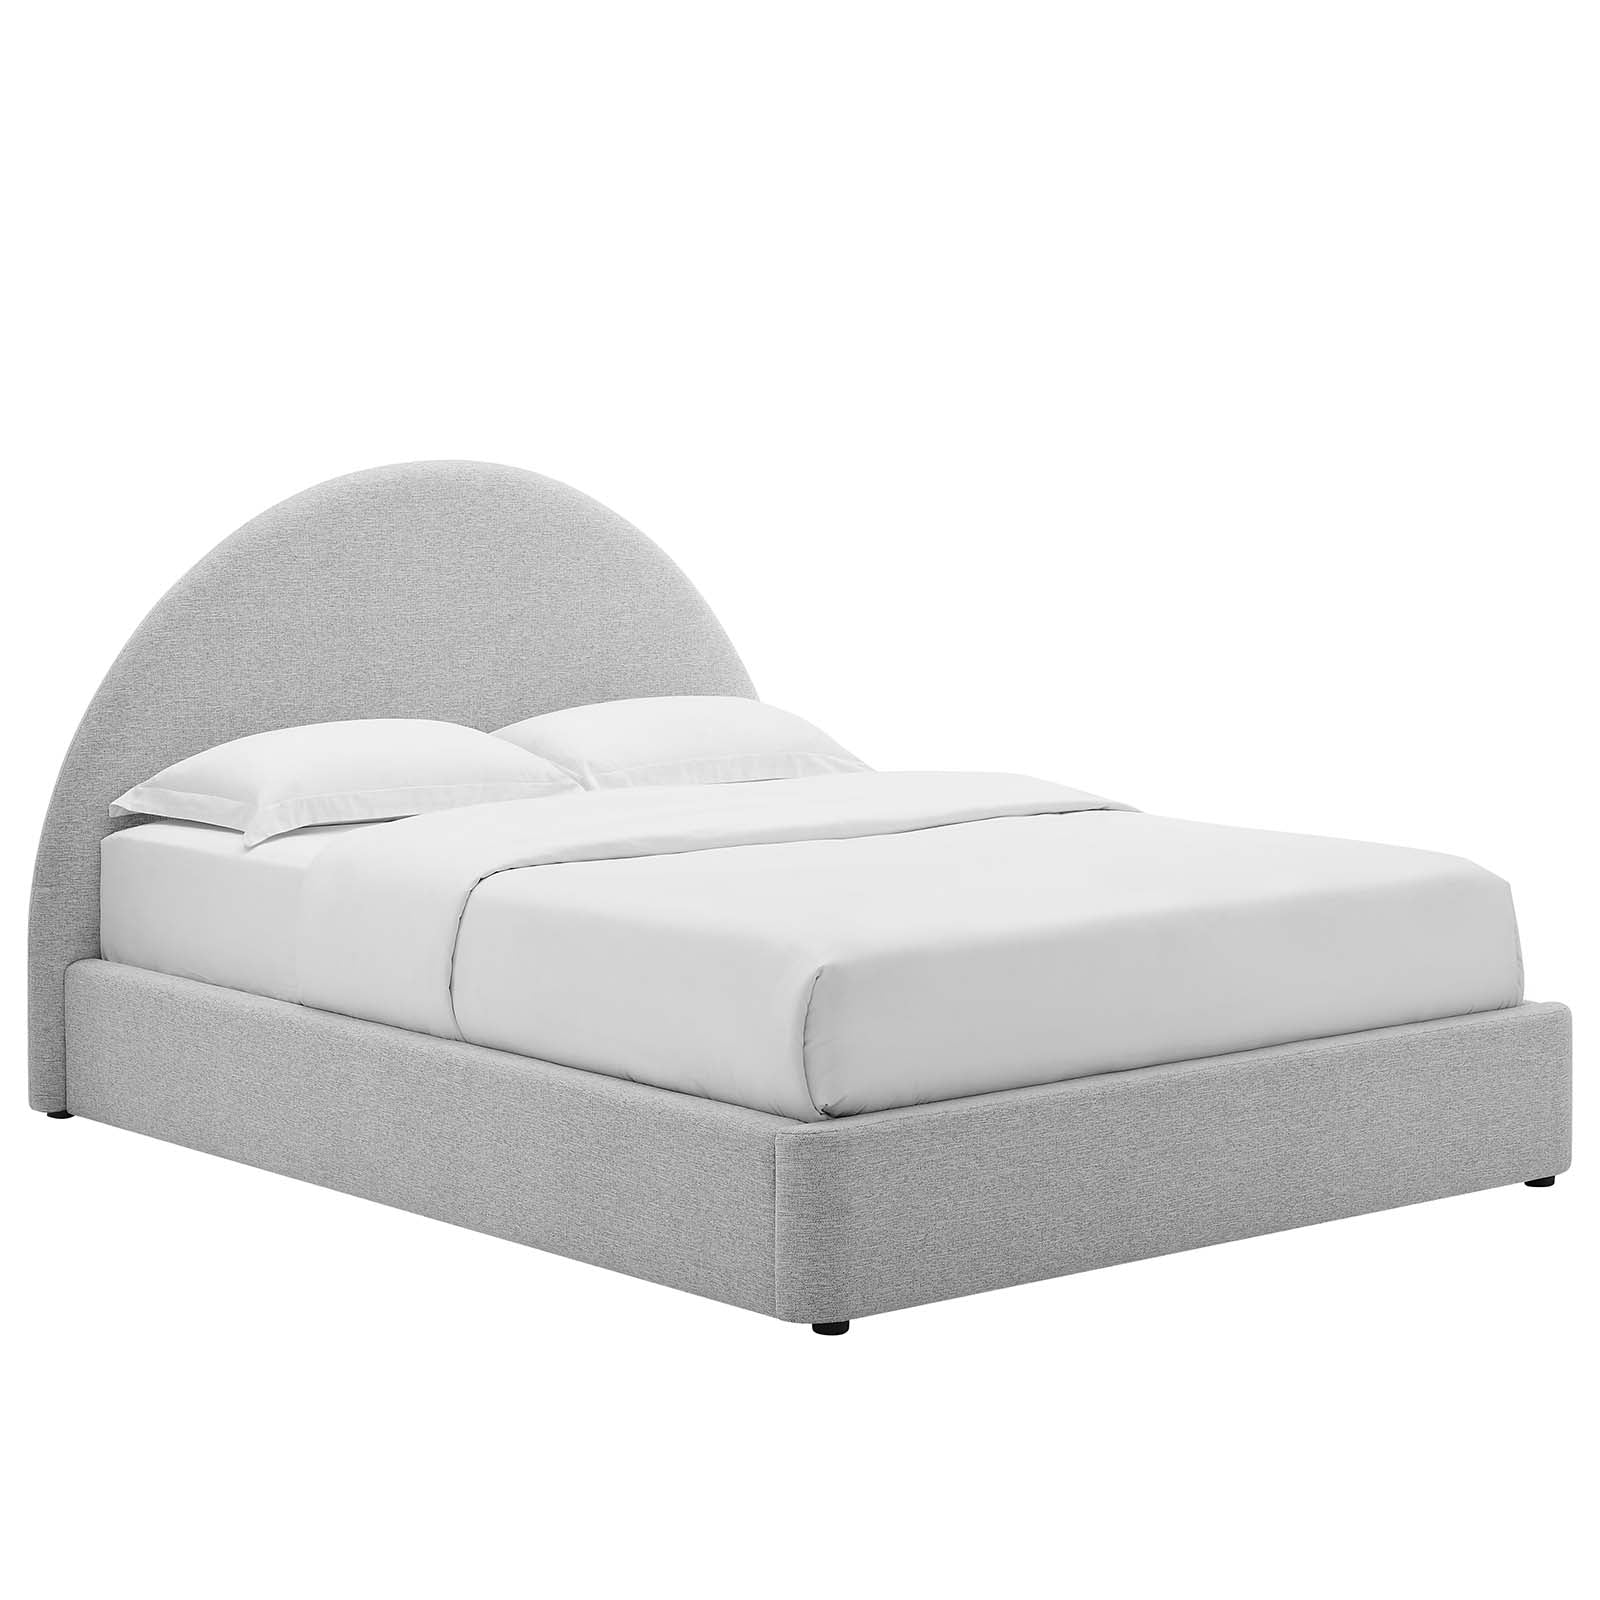 Resort Upholstered Fabric Arched Round Full Platform Bed